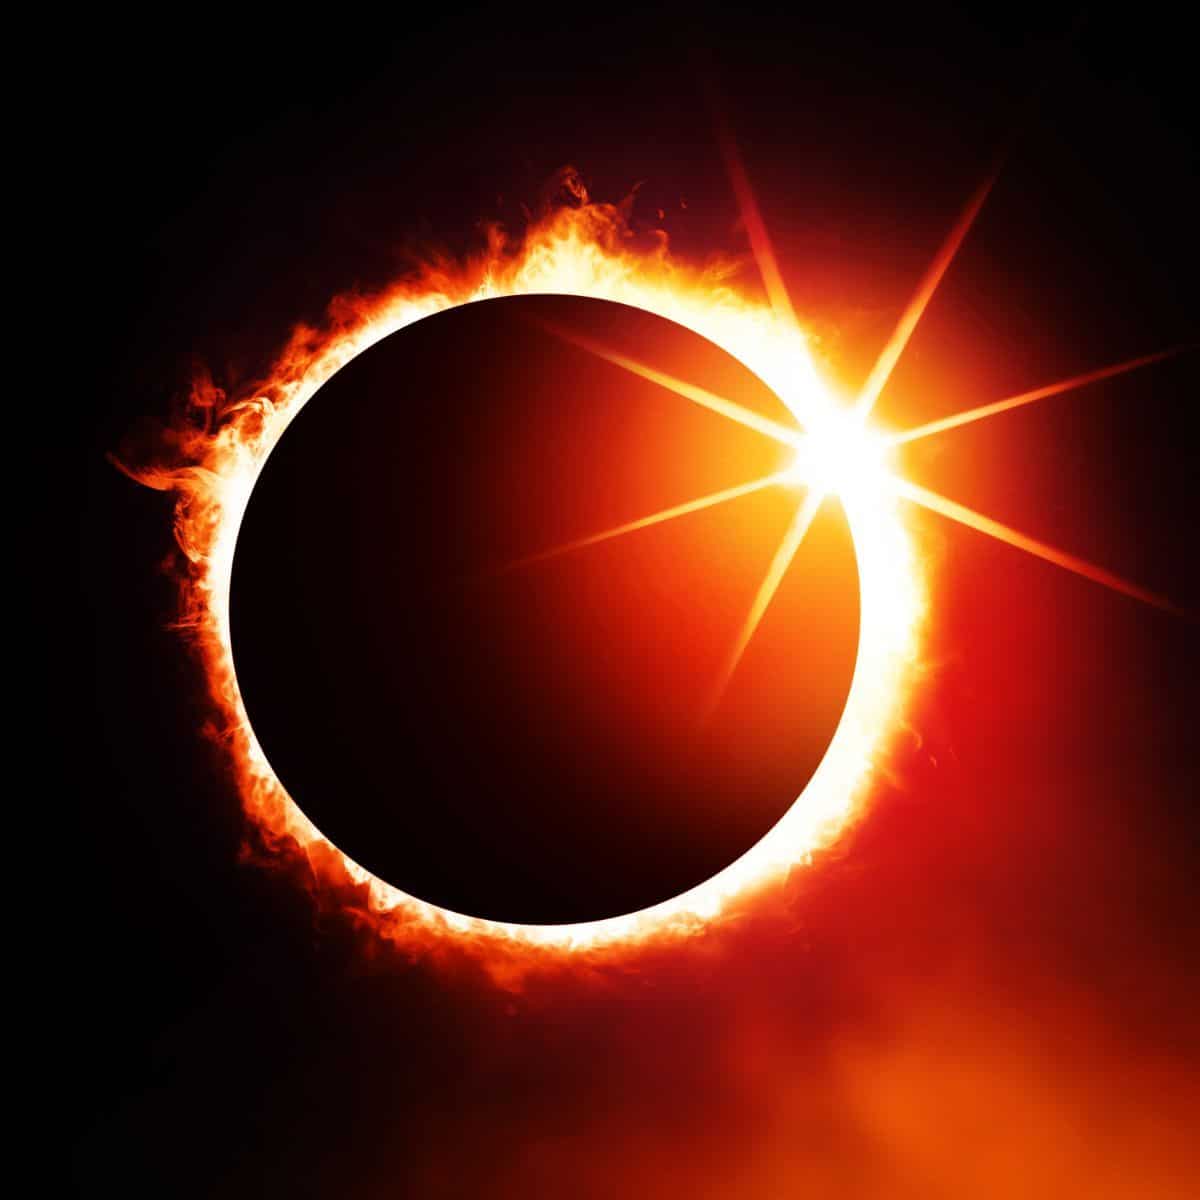 Ring Of Fire Eclipse meaning spiritual